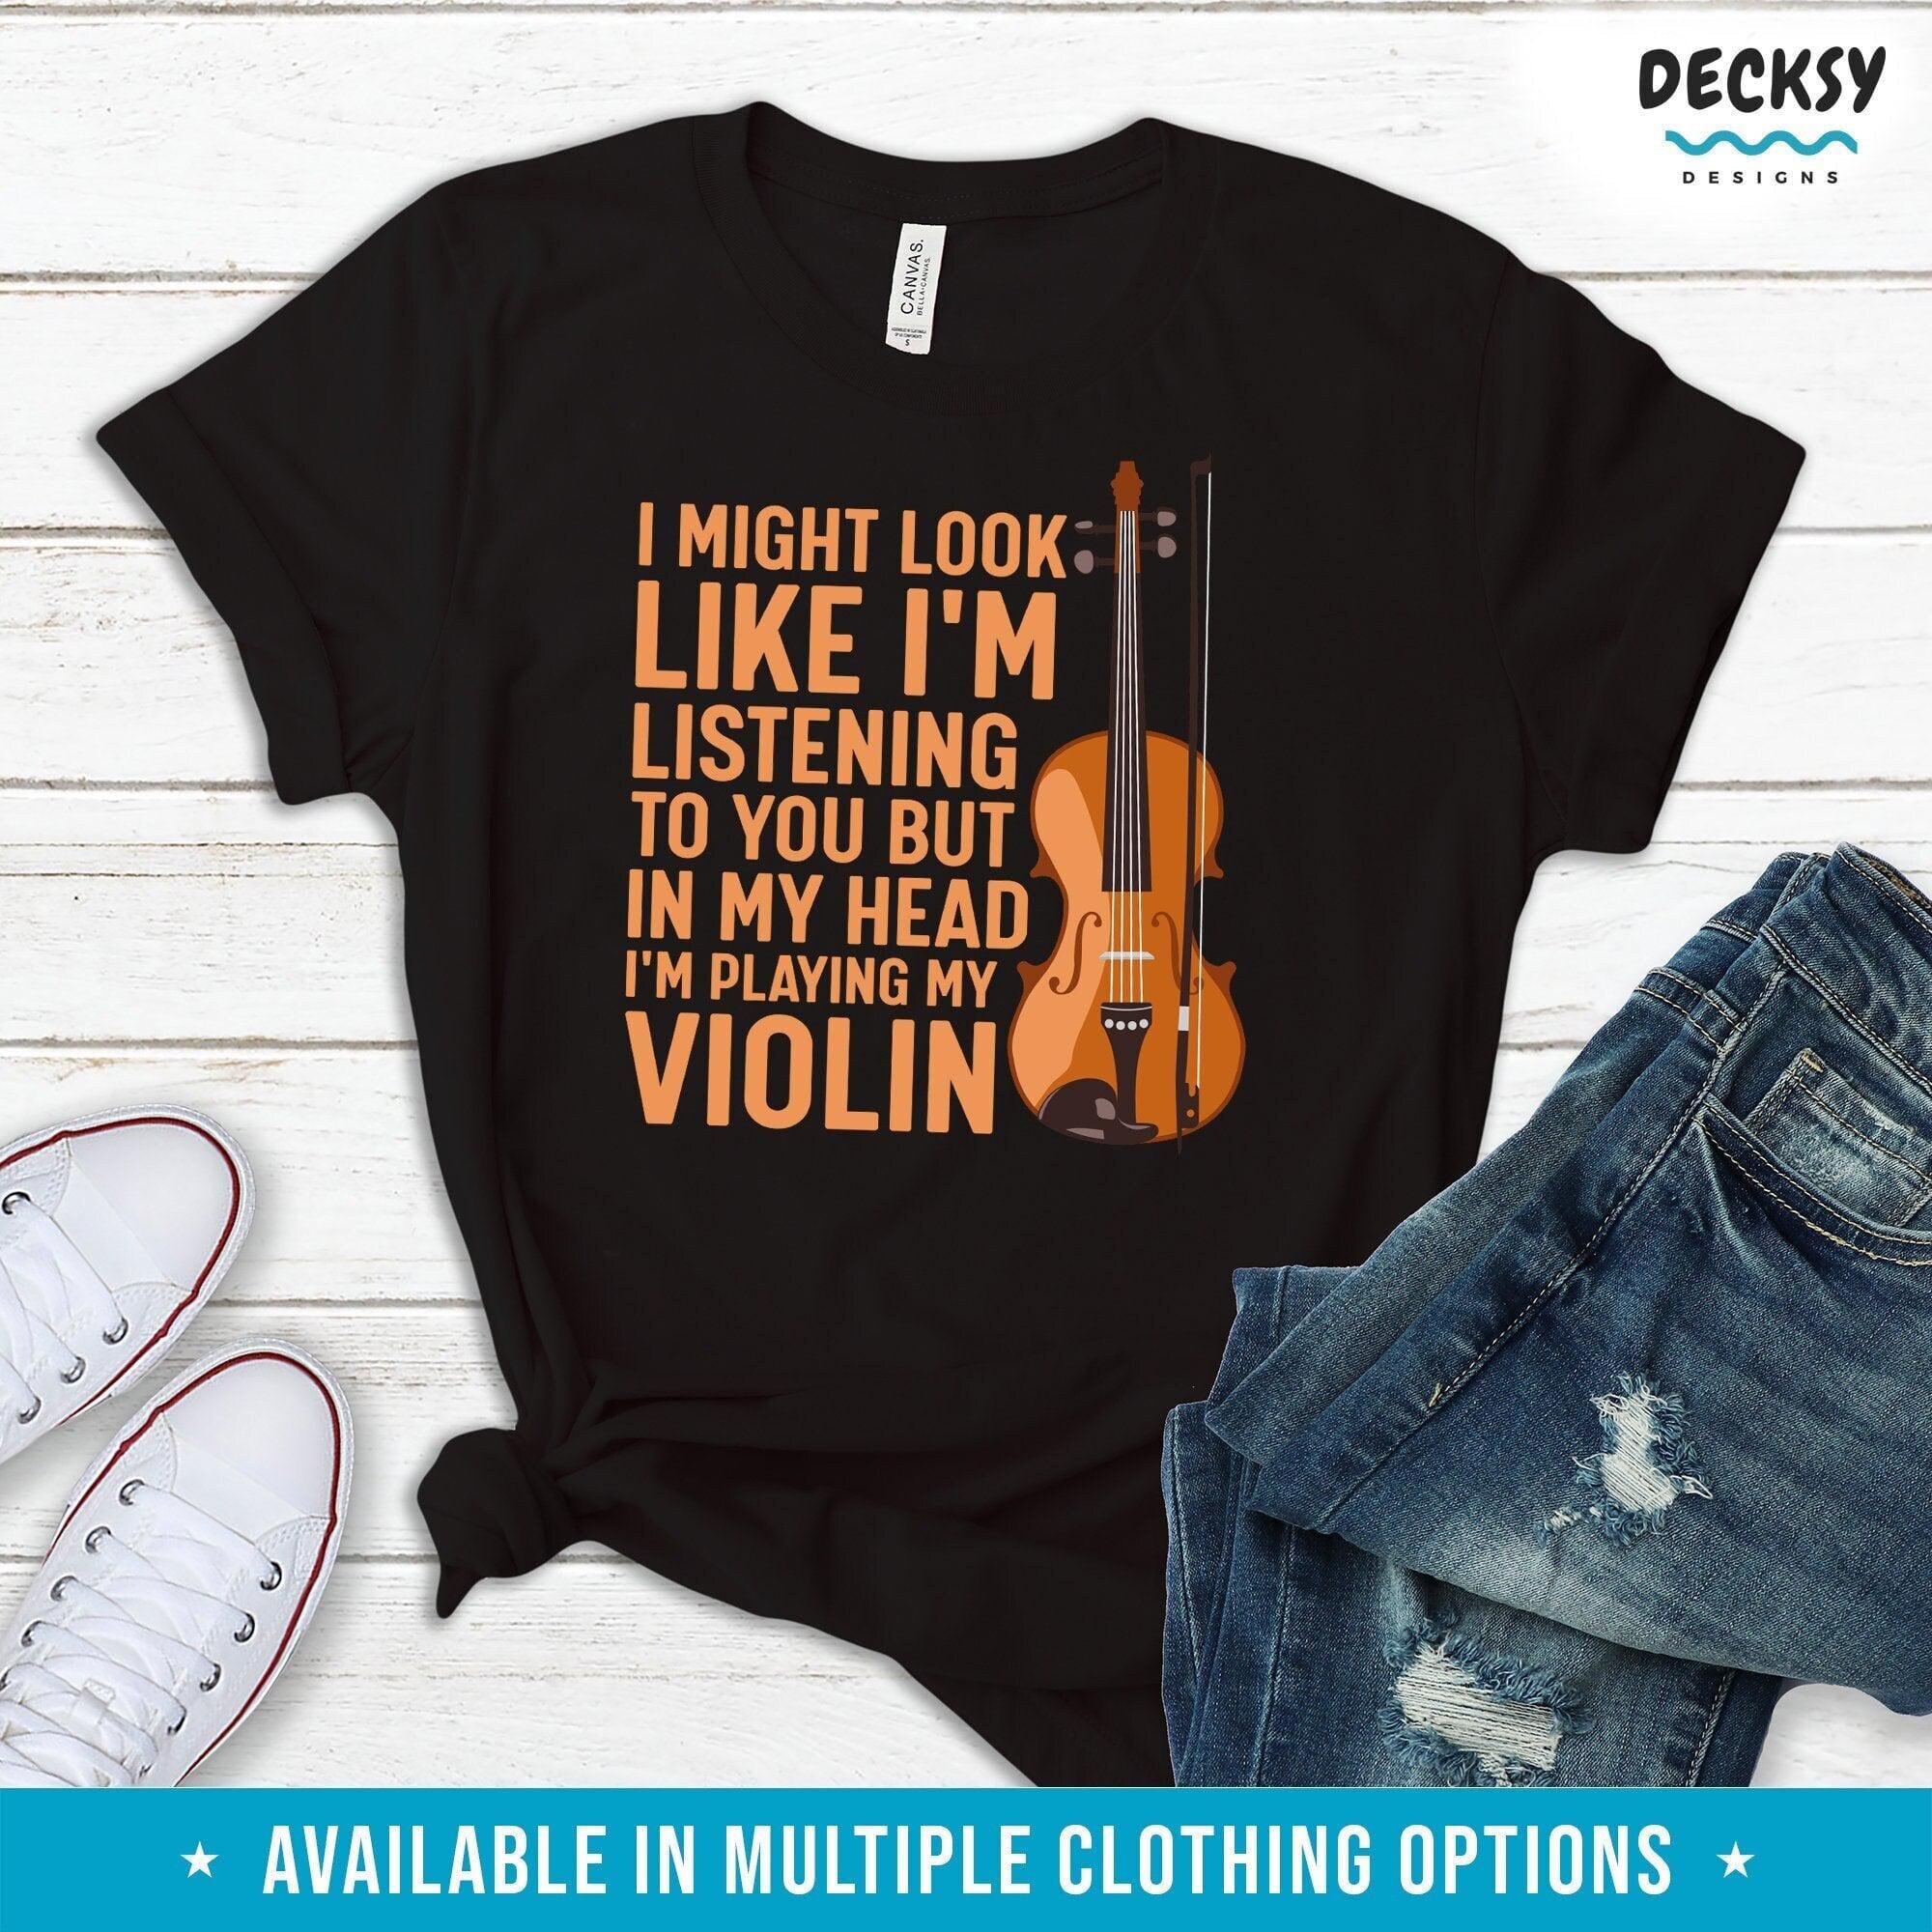 Violin Player Shirt, Violinist Gift-Clothing:Gender-Neutral Adult Clothing:Tops & Tees:T-shirts:Graphic Tees-DecksyDesigns